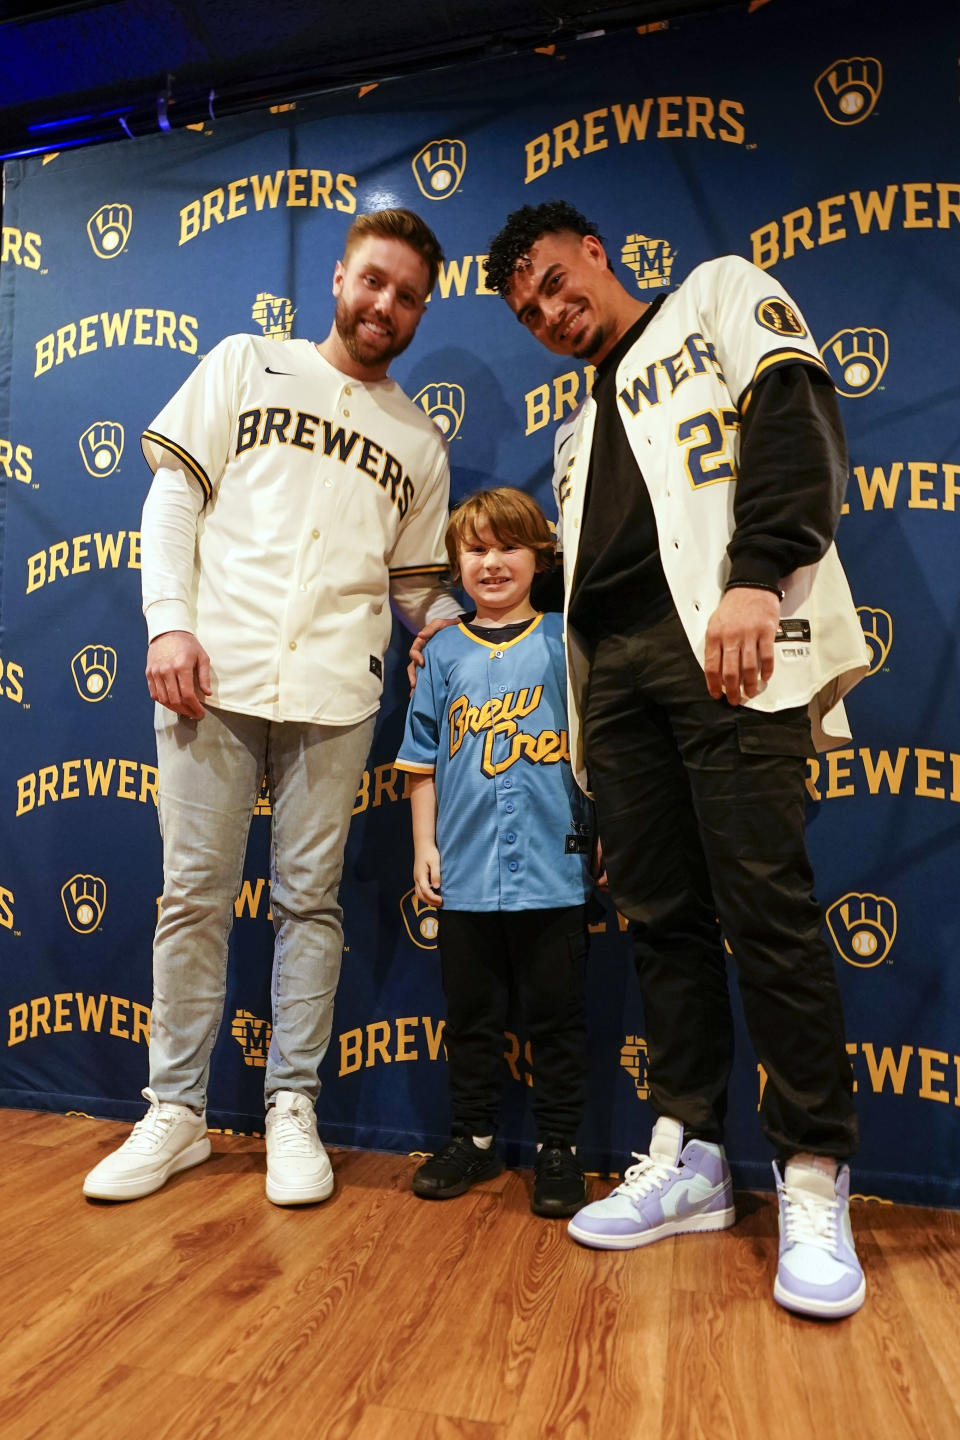 Seven-year-old Adam Lauzon poses for a picture with Milwaukee Brewers' Willy Adames and Owen Miller at a promotional event Wednesday, Jan. 18, 2023, in Milwaukee. (AP Photo/Morry Gash)